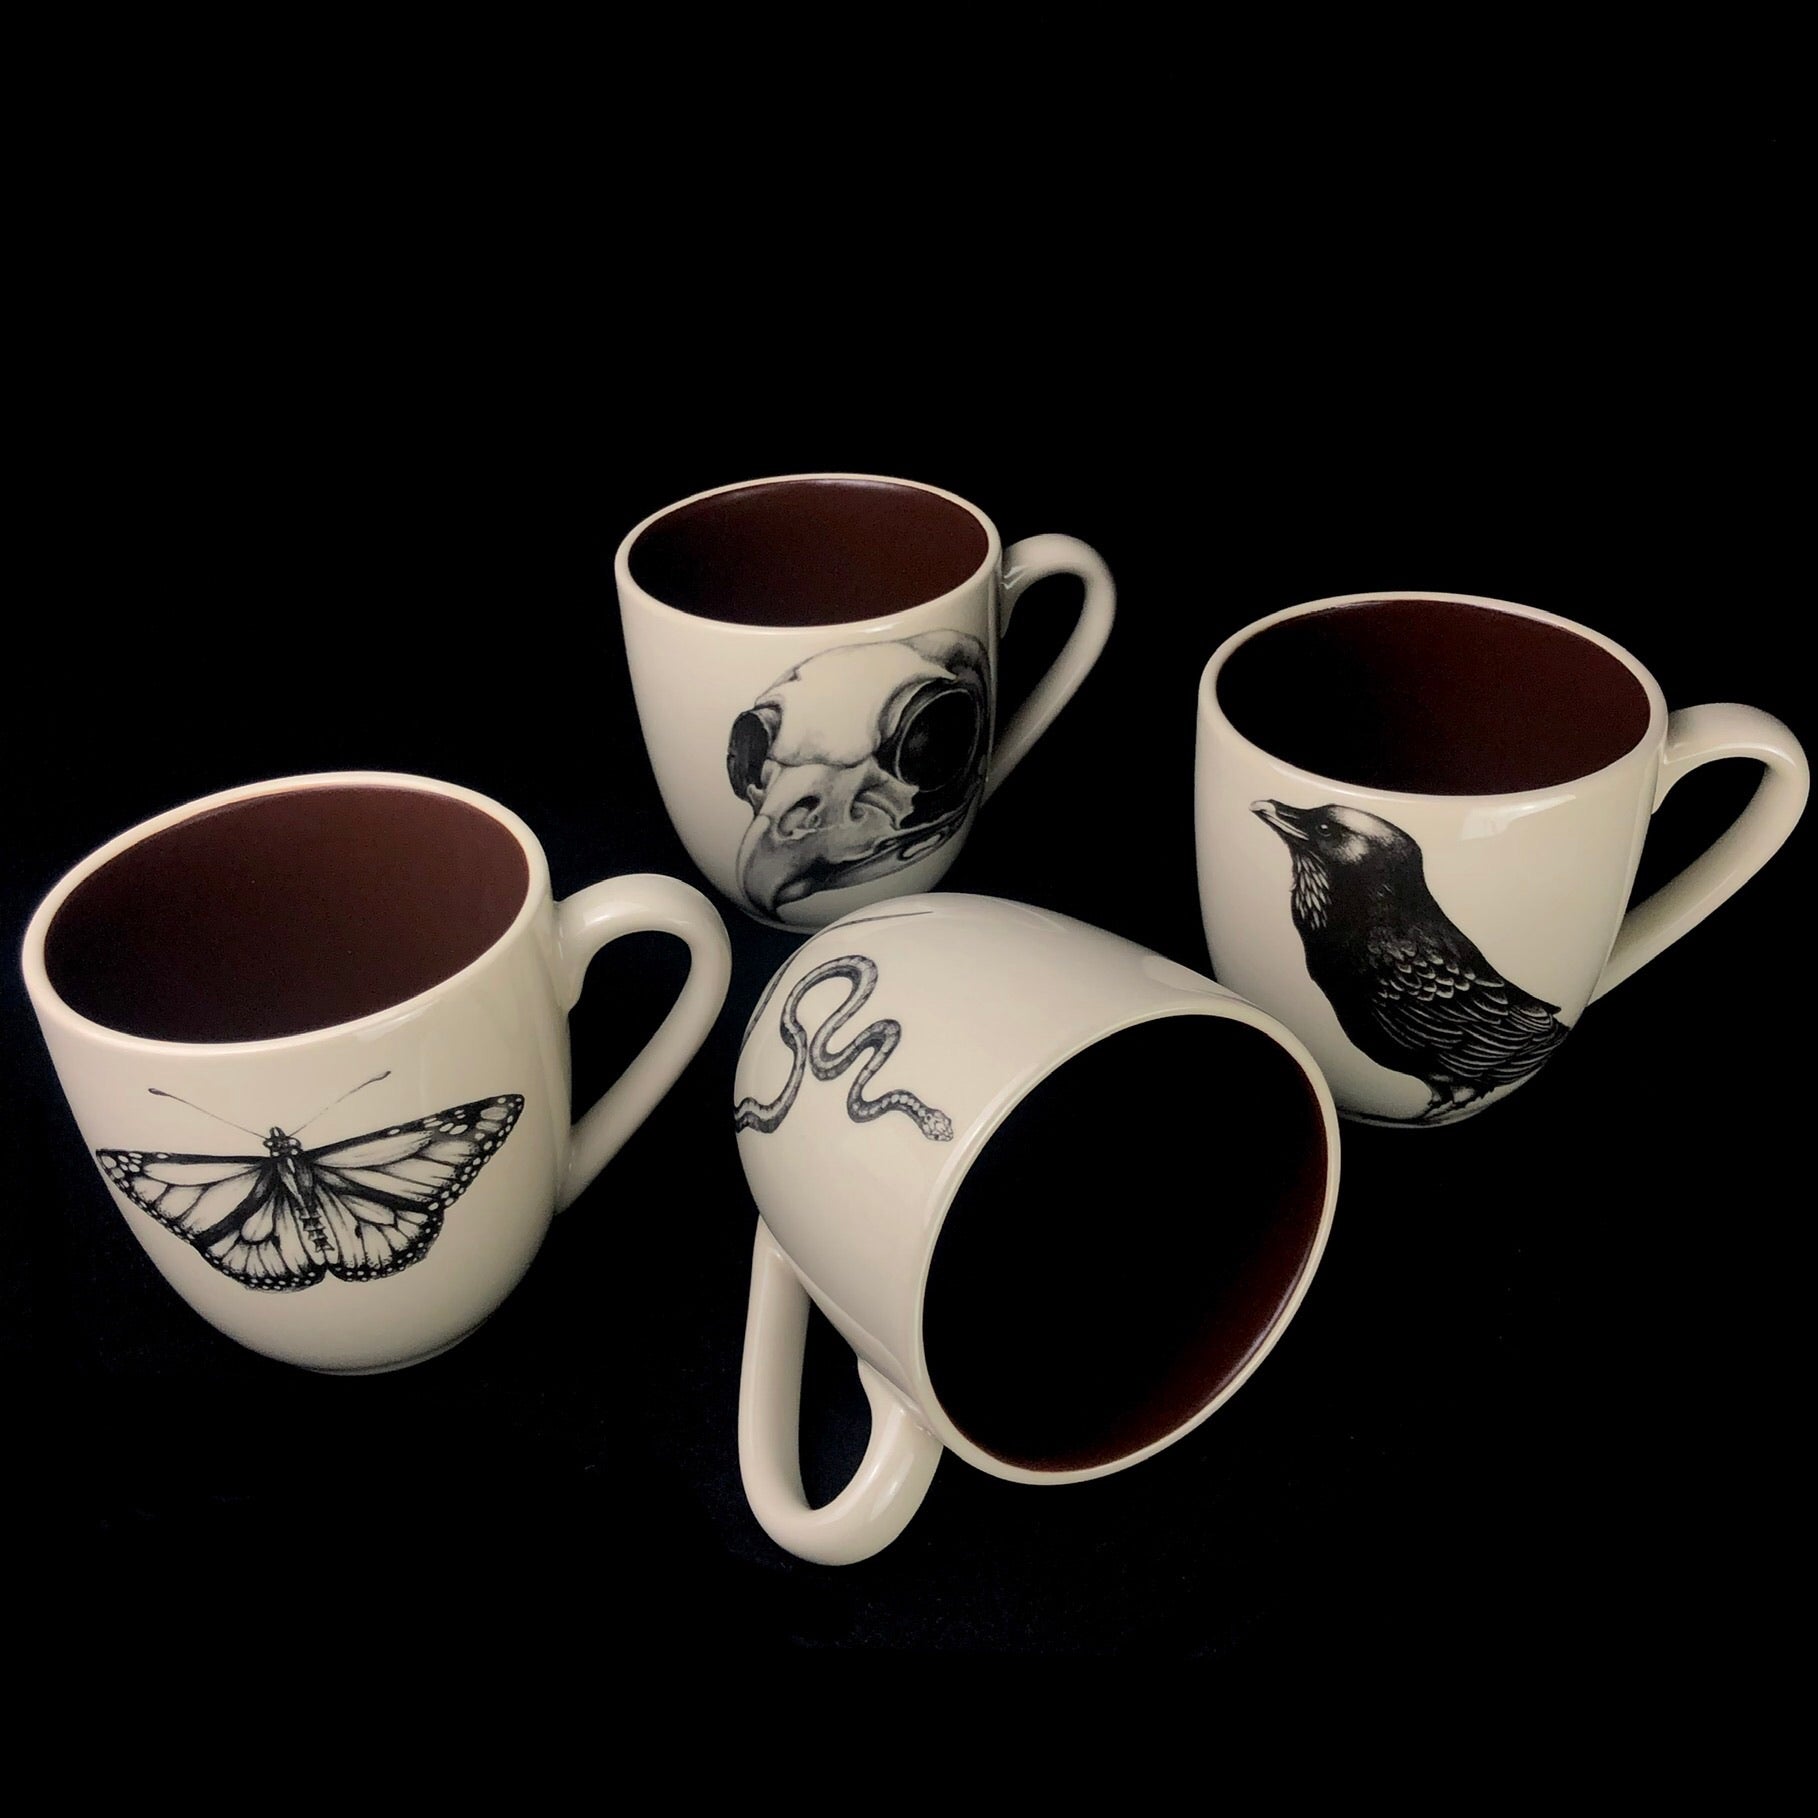 Set of four mugs referencing death including the Monarch Butterfly, Owl Skull, Snake and Raven